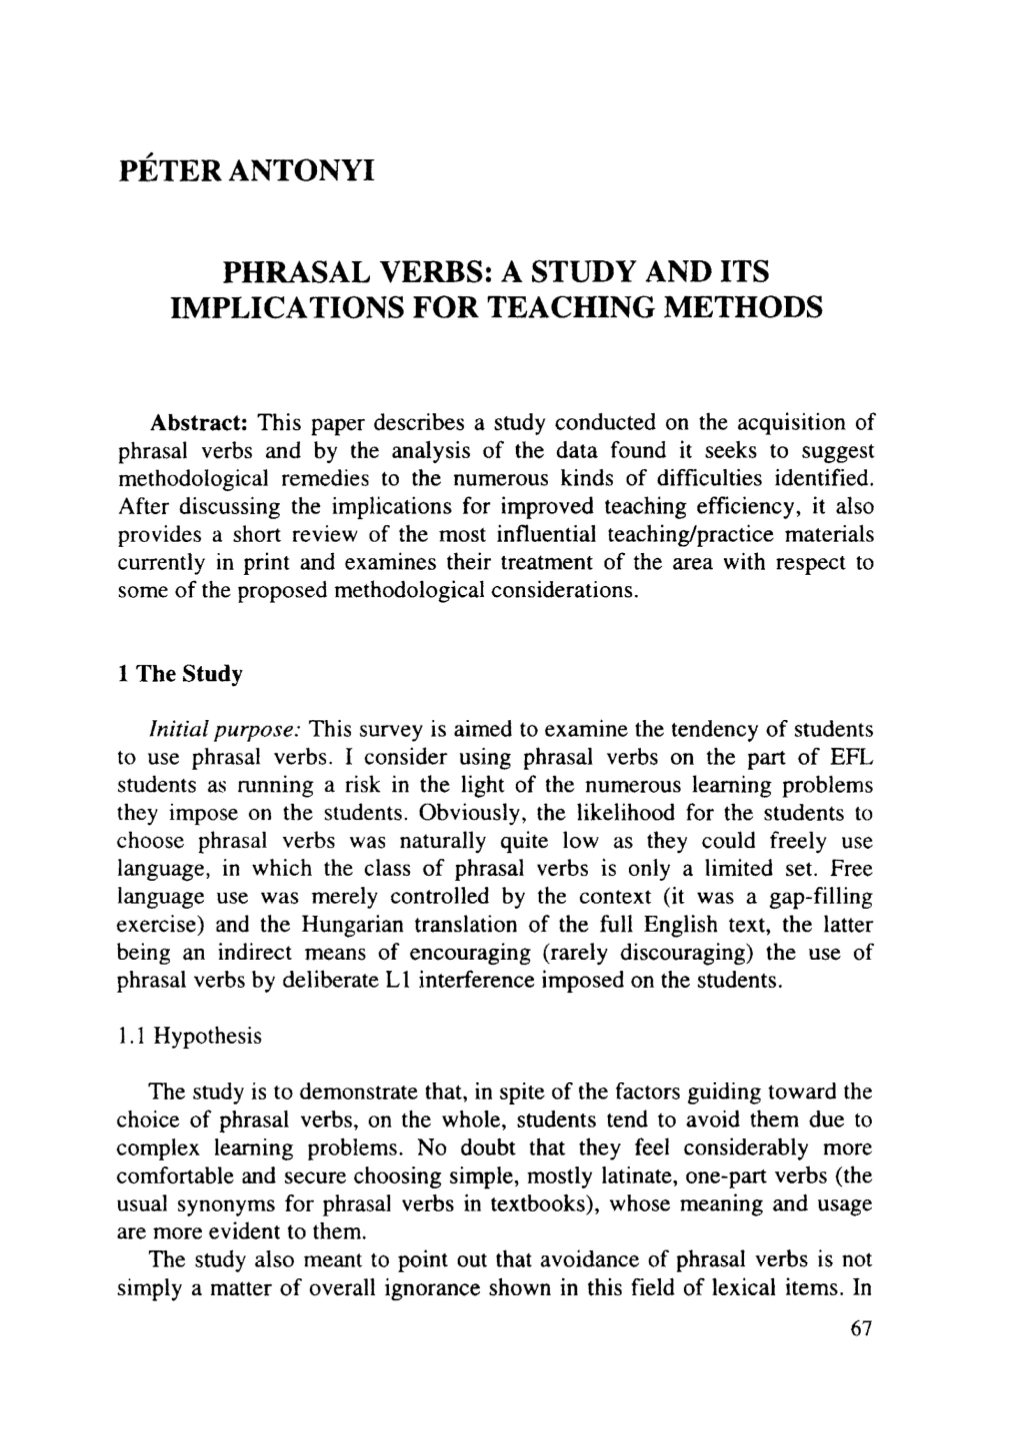 Péter Antonyi Phrasal Verbs: a Study and Its Implications for Teaching